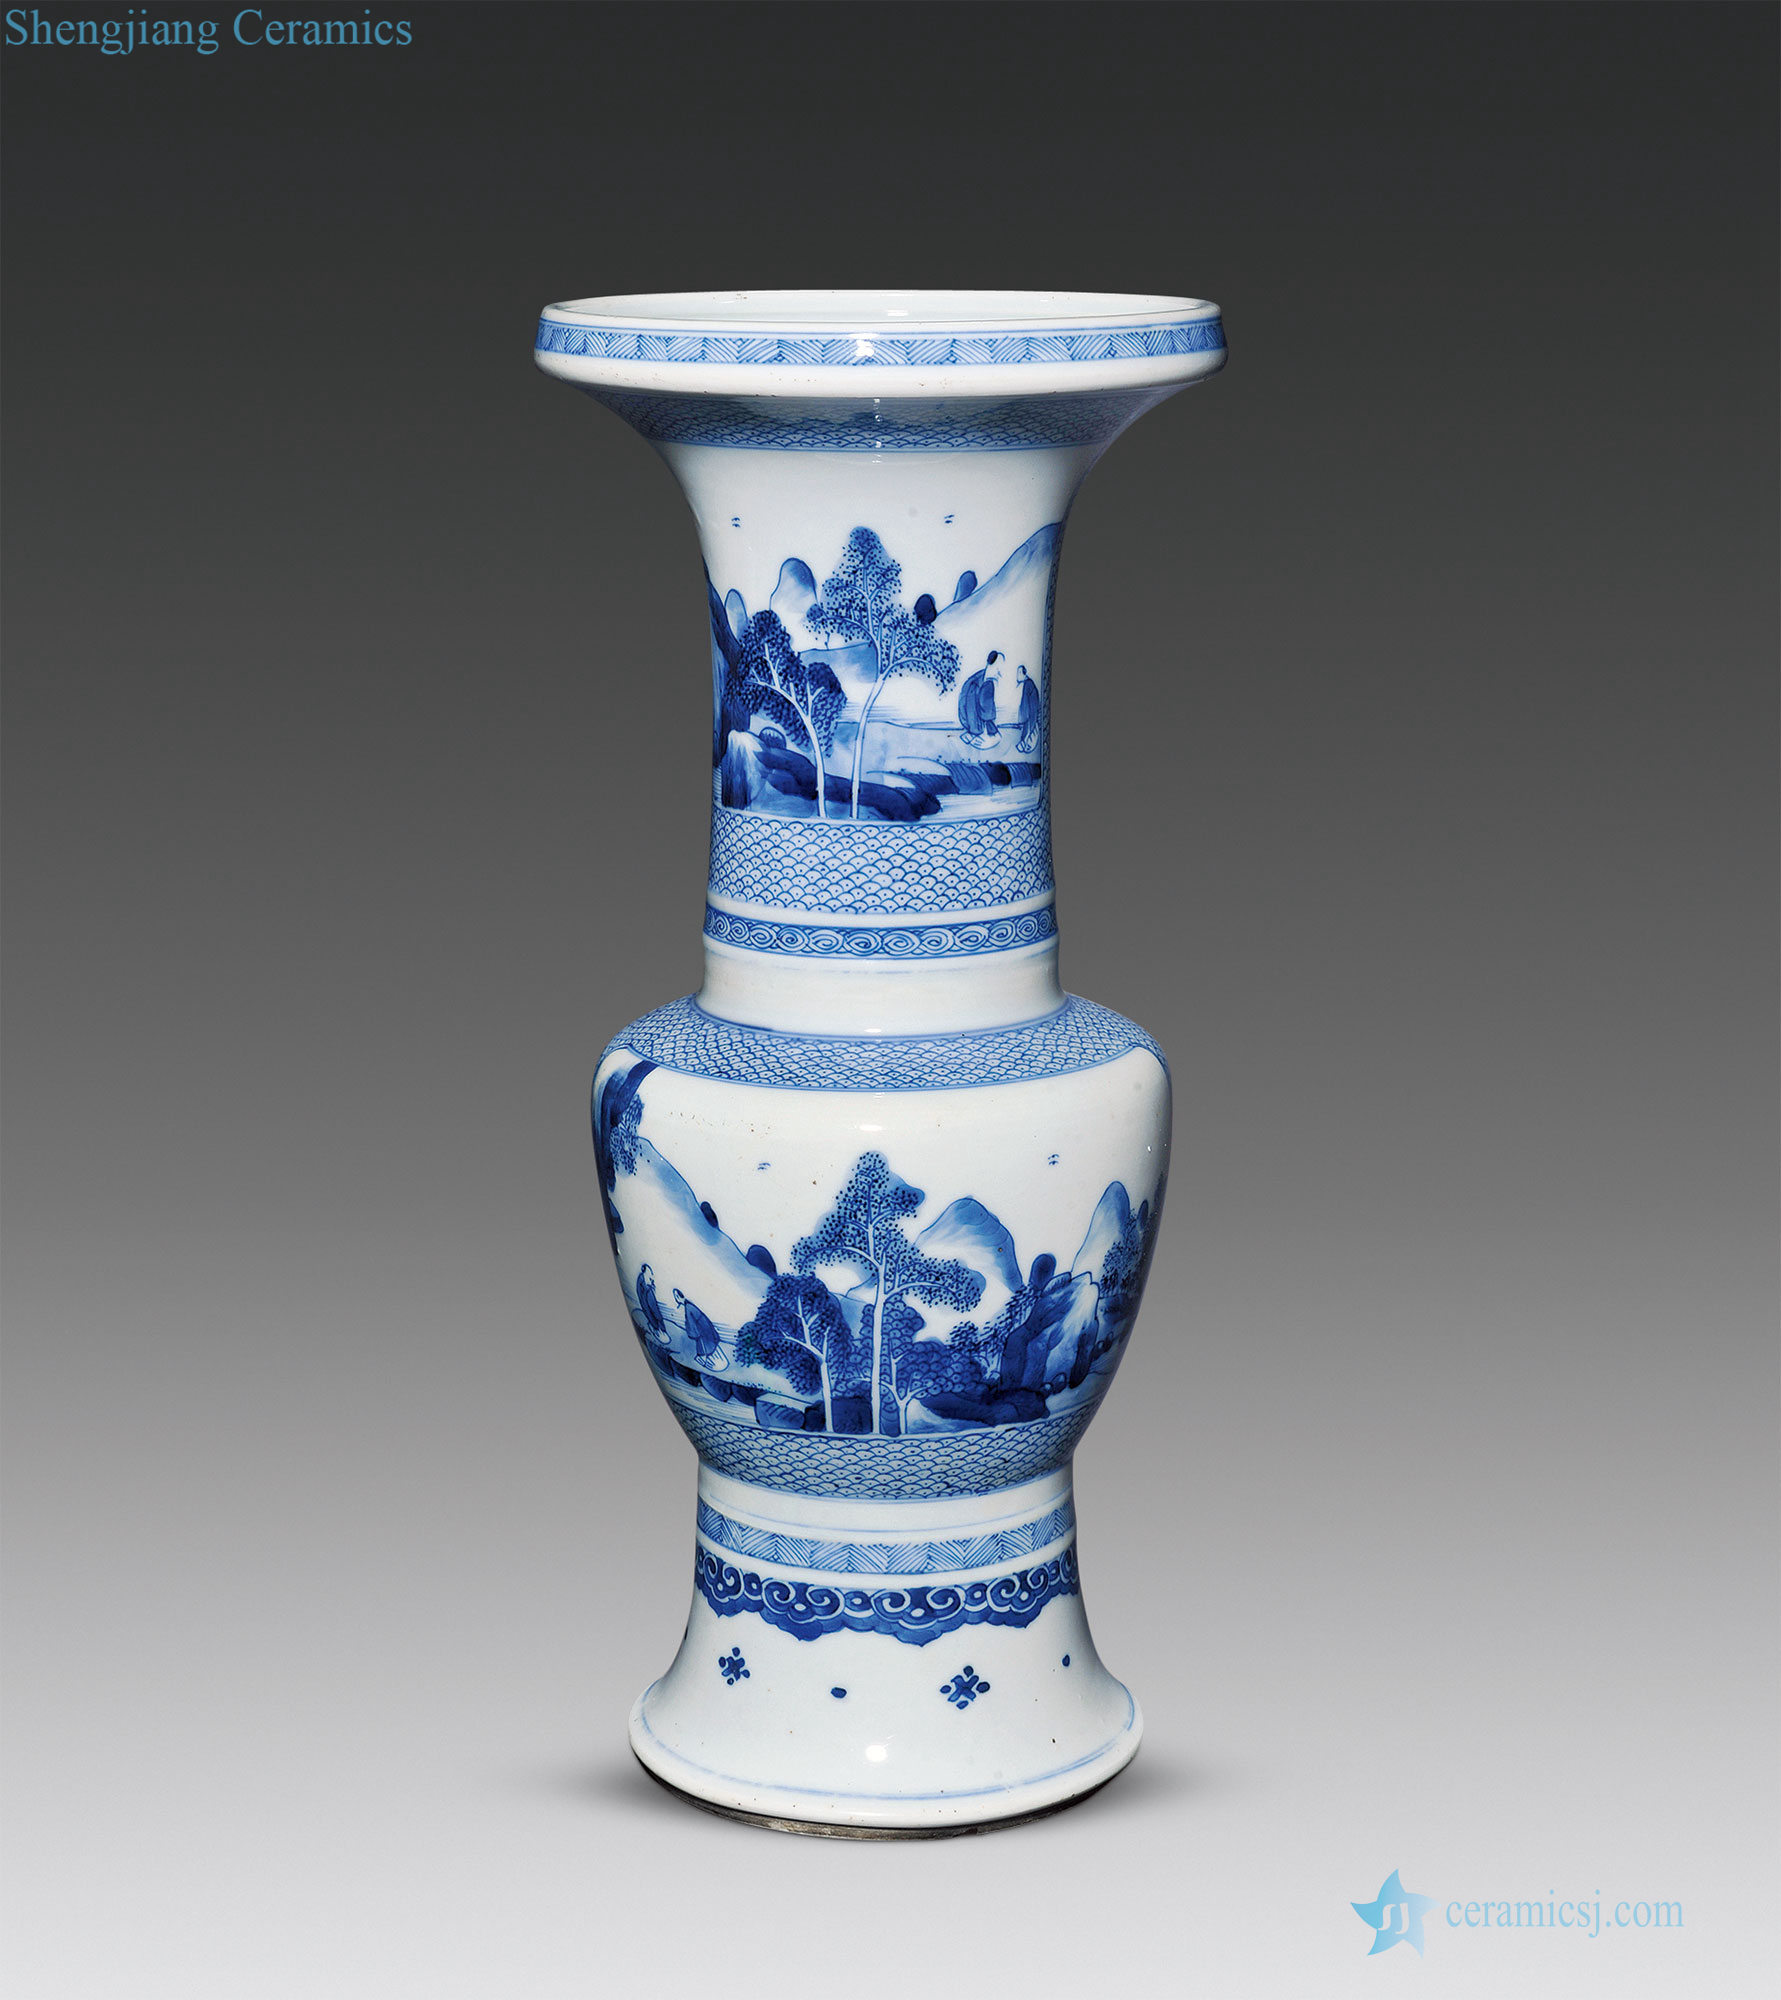 Qing yongzheng medallion landscape character lines flower vase with blue and white brocade